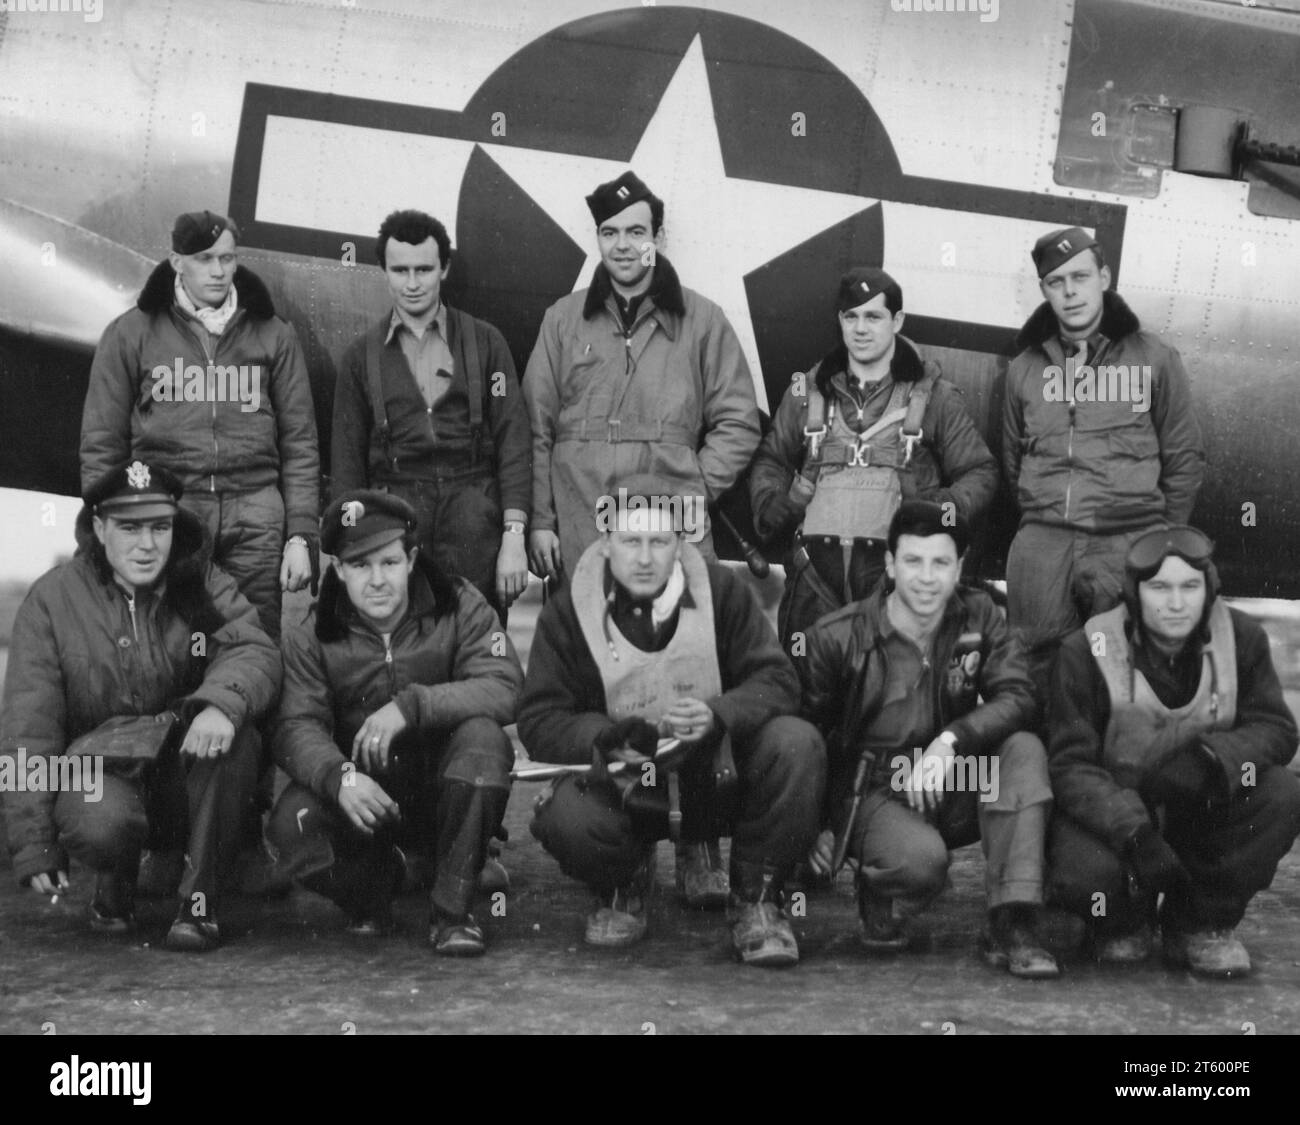 Lead Crew On Bombing Mission To Dresden, Germany, In Front A Boeing B-17 Flying Fortress. 360Th Bomb Squadron, 303Rd Bomb Group. England, 14 February 1945 Stock Photo